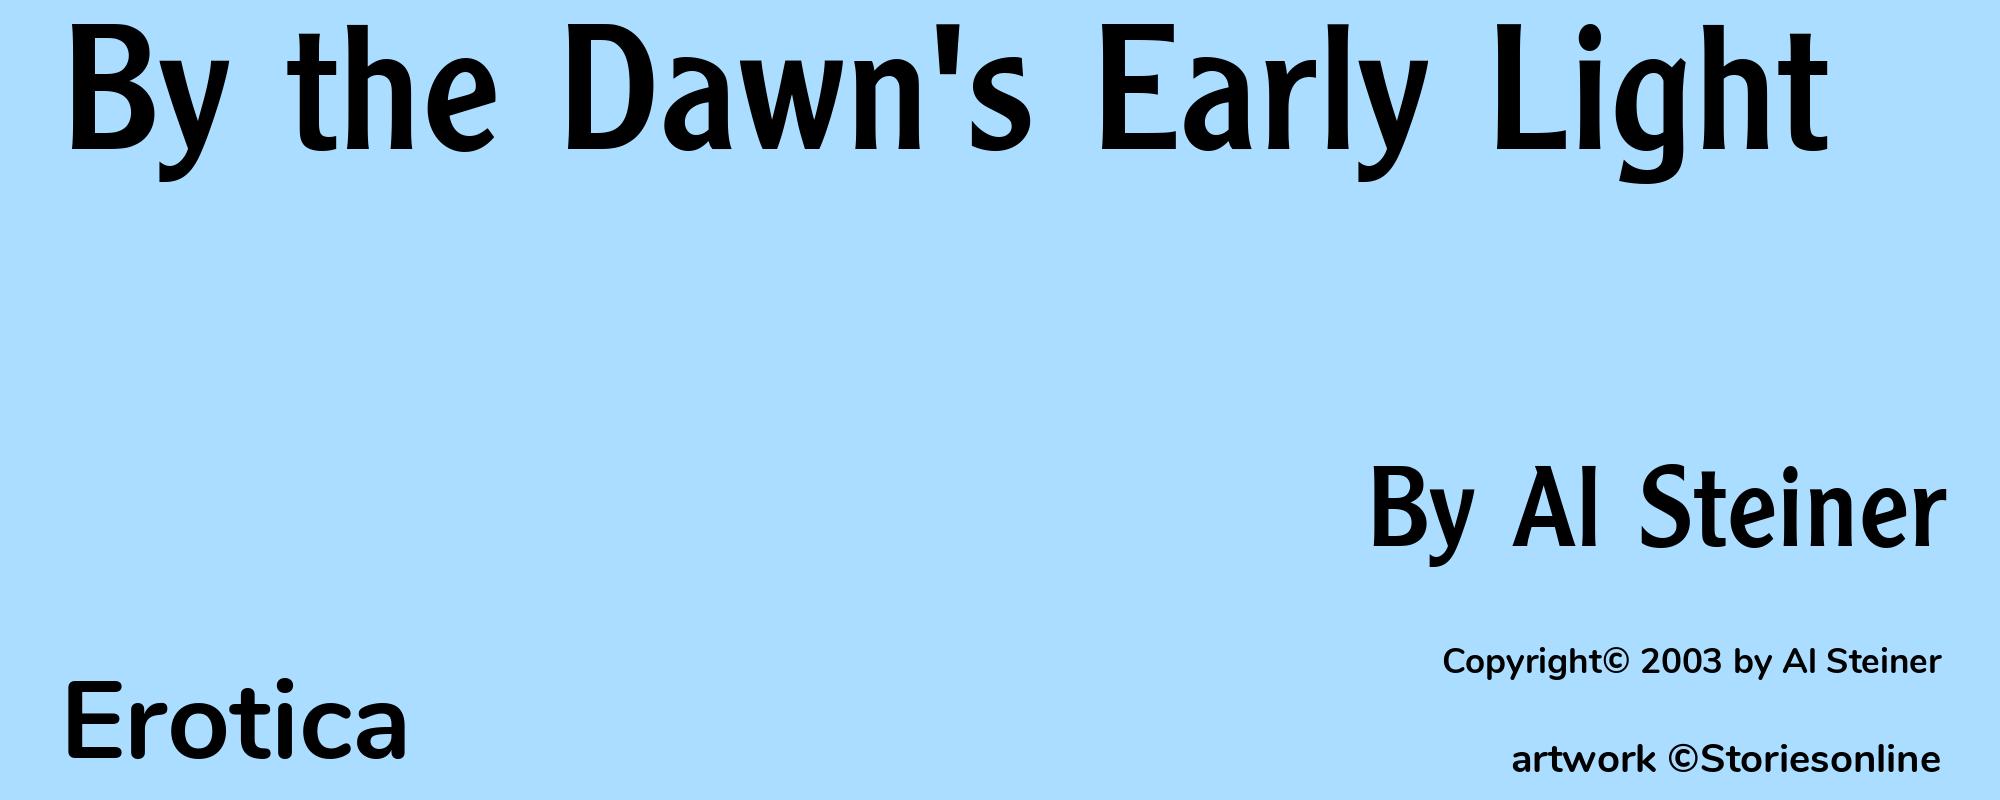 By the Dawn's Early Light - Cover